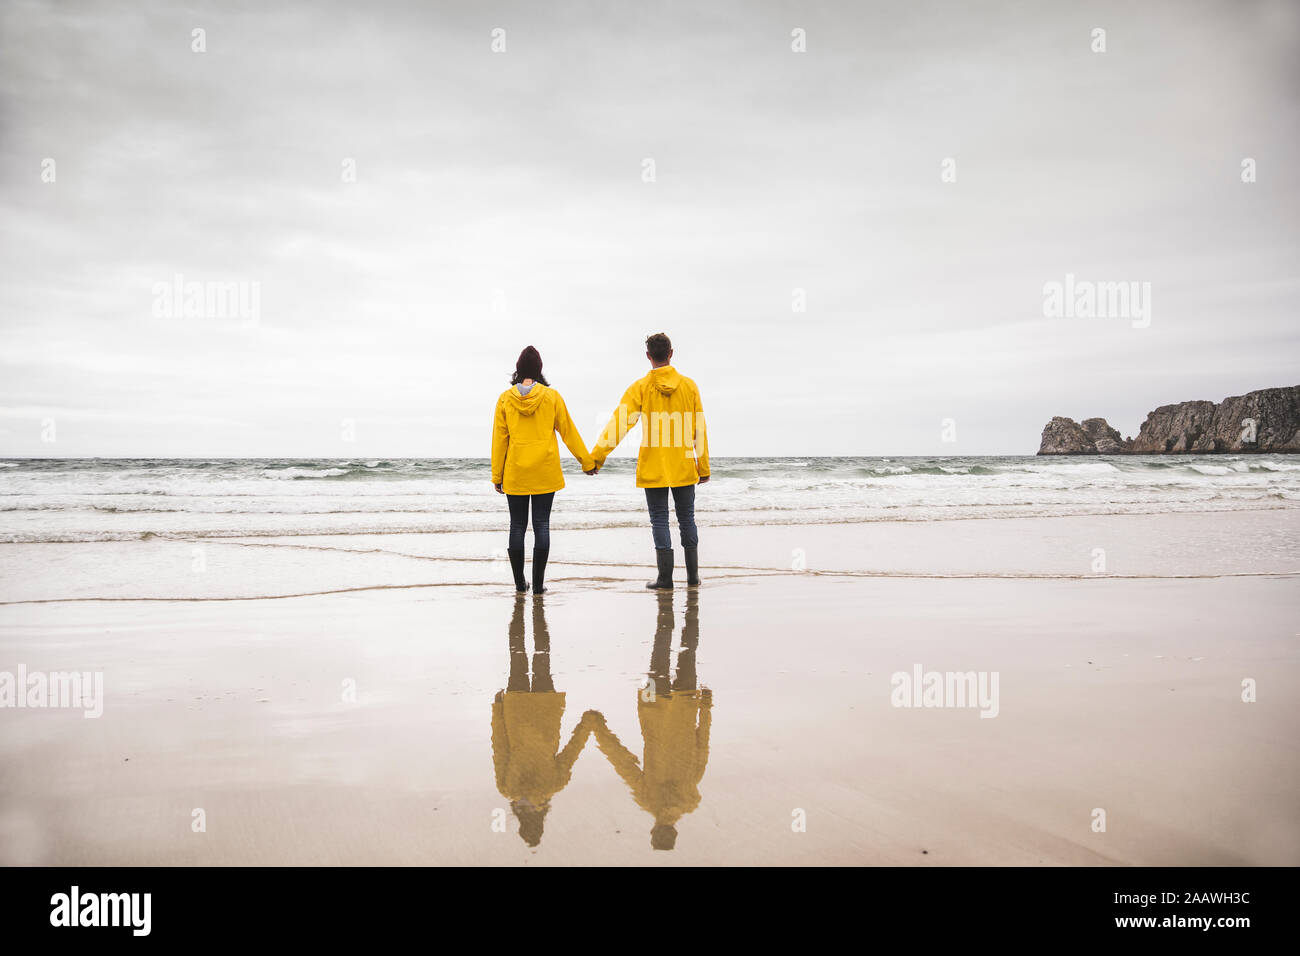 Young woman wearing yellow rain jackets and standing at the beach, Bretagne, France Stock Photo